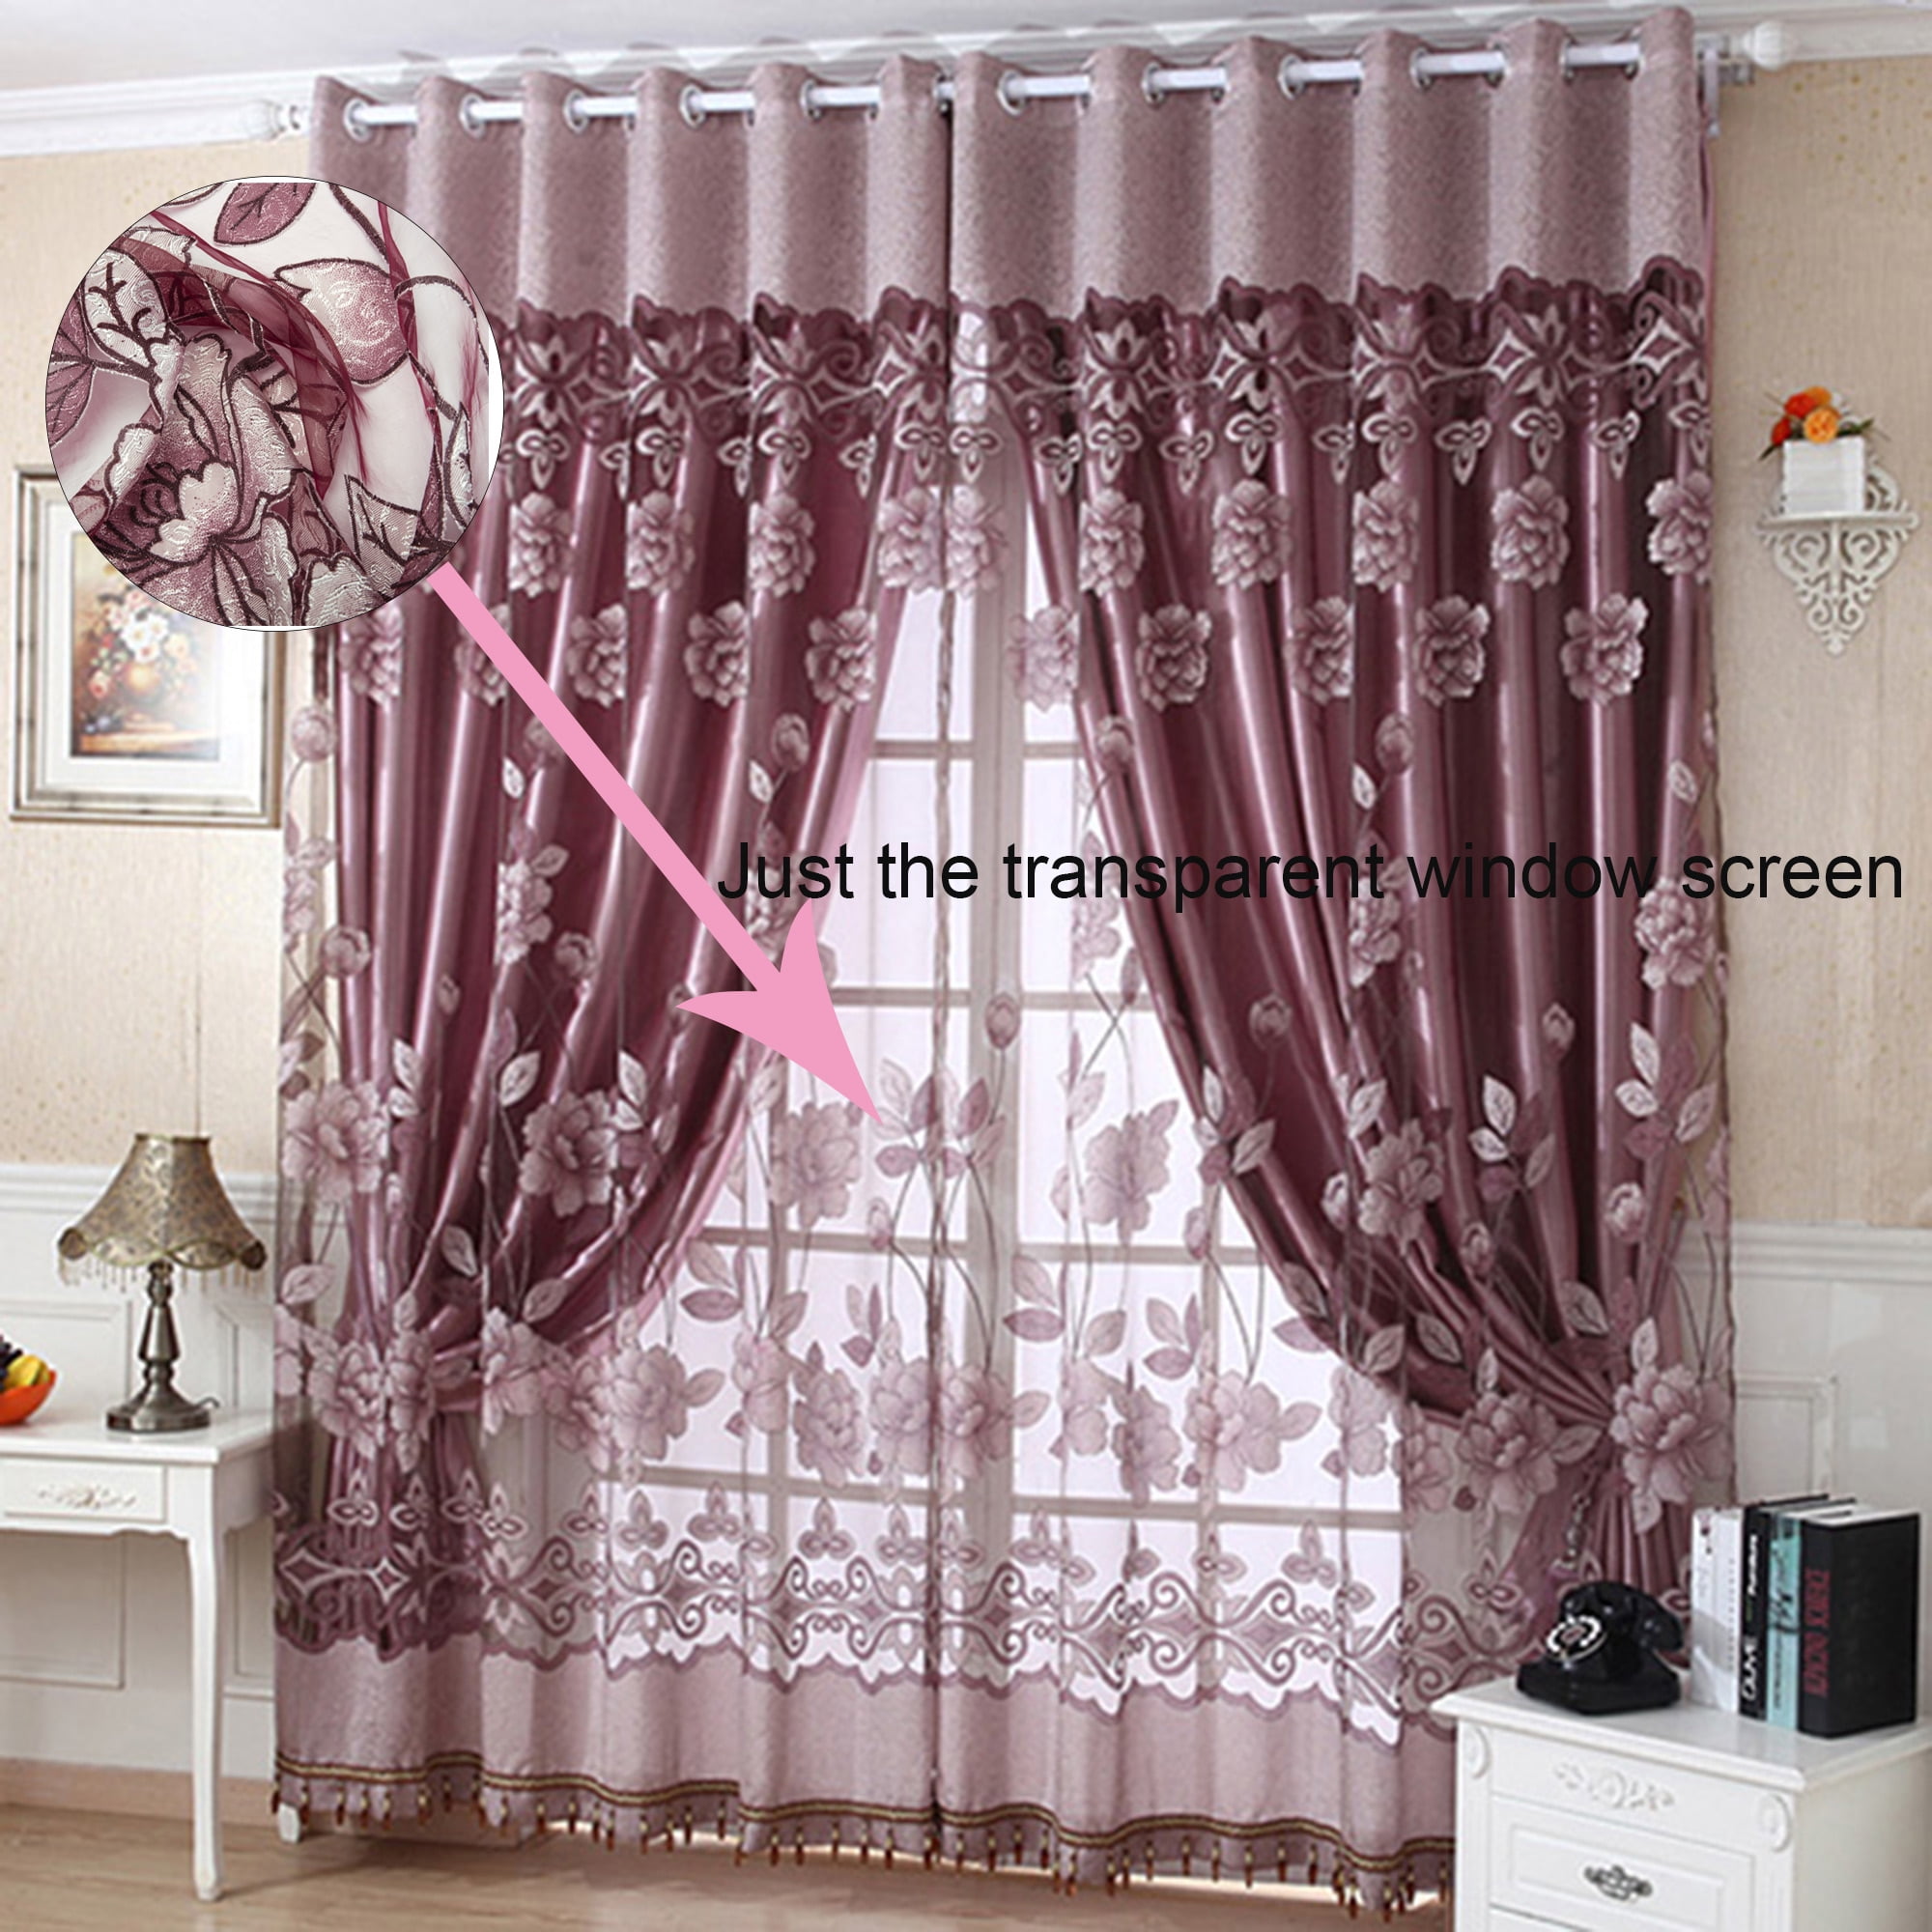 Sheer Lace Curtain Voile Flower Beads Hand Stitched Mesh Window Scarves 1 Panel 